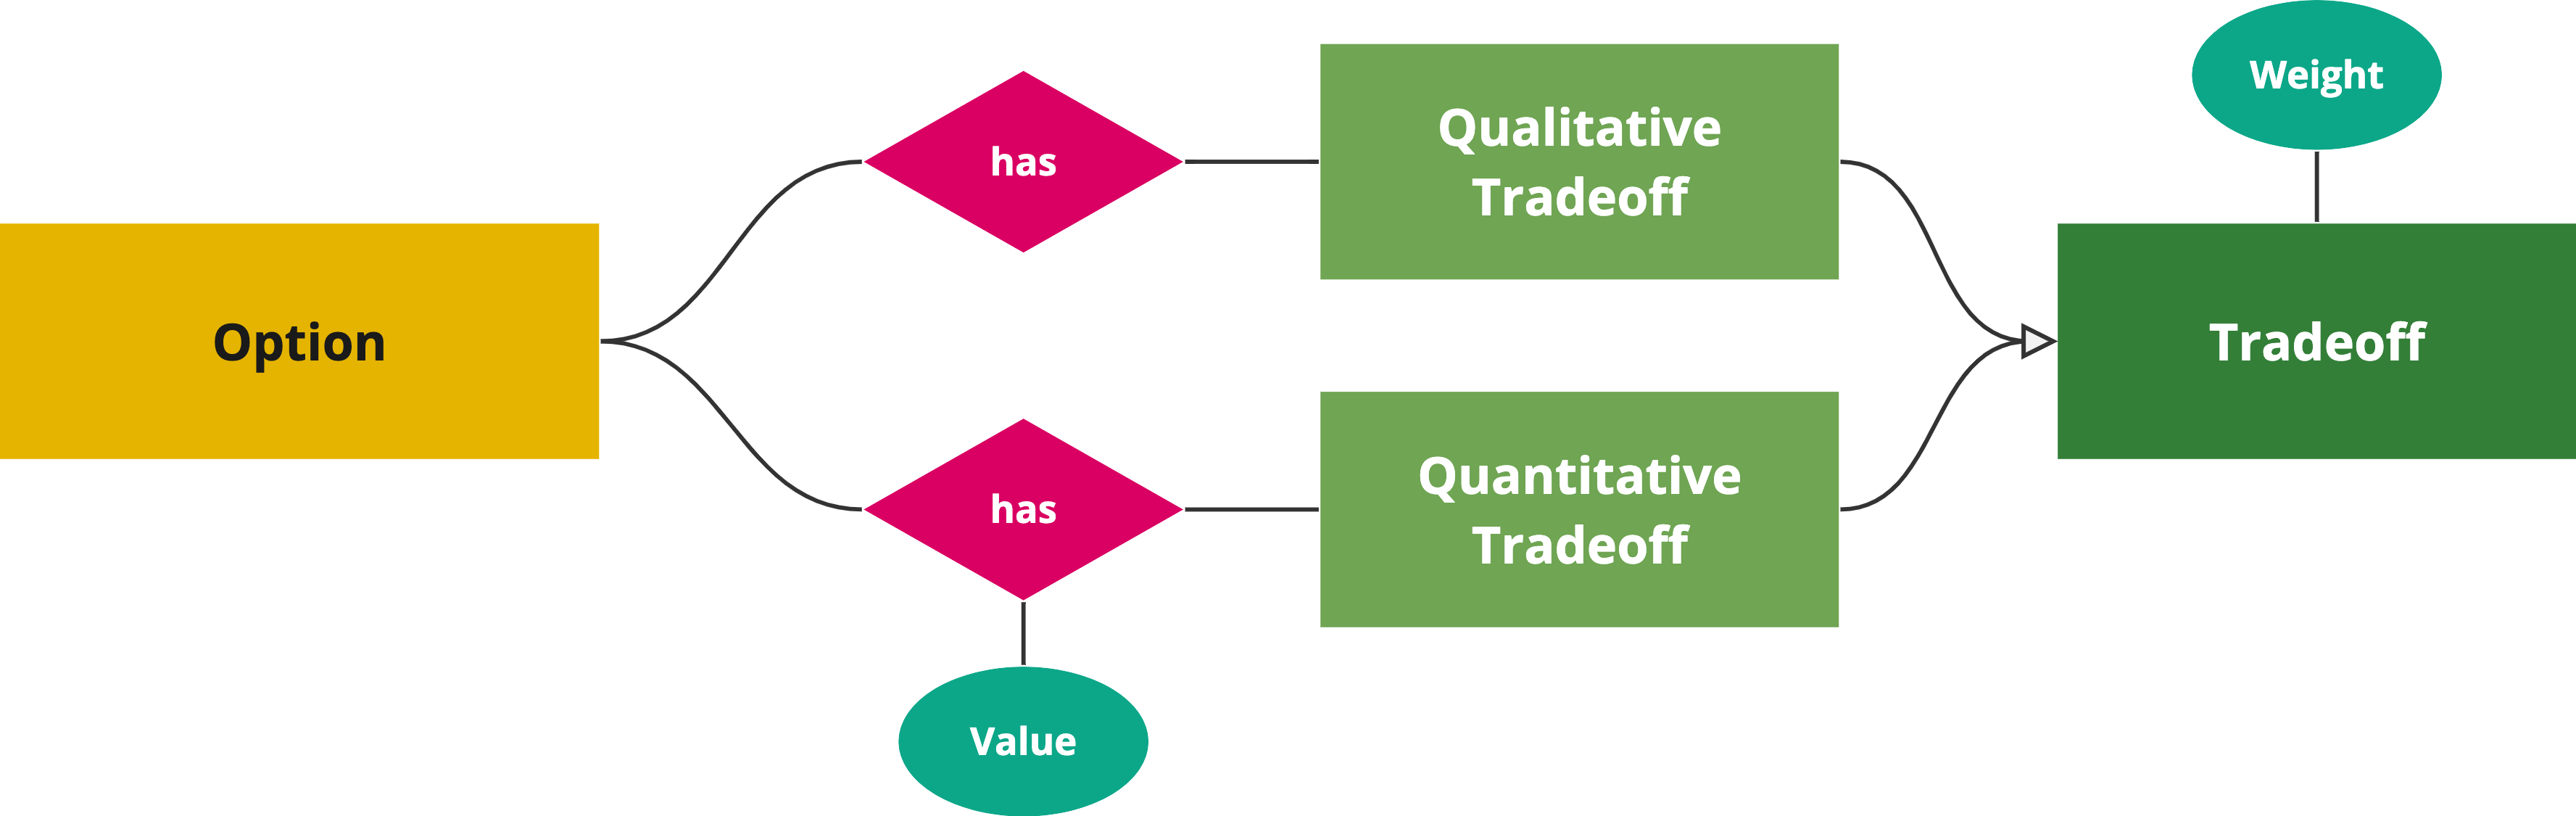 Simplified UML-like diagram showing that each tradeoff has a weight, but the relationship between option and quantitative tradeoff also has a value